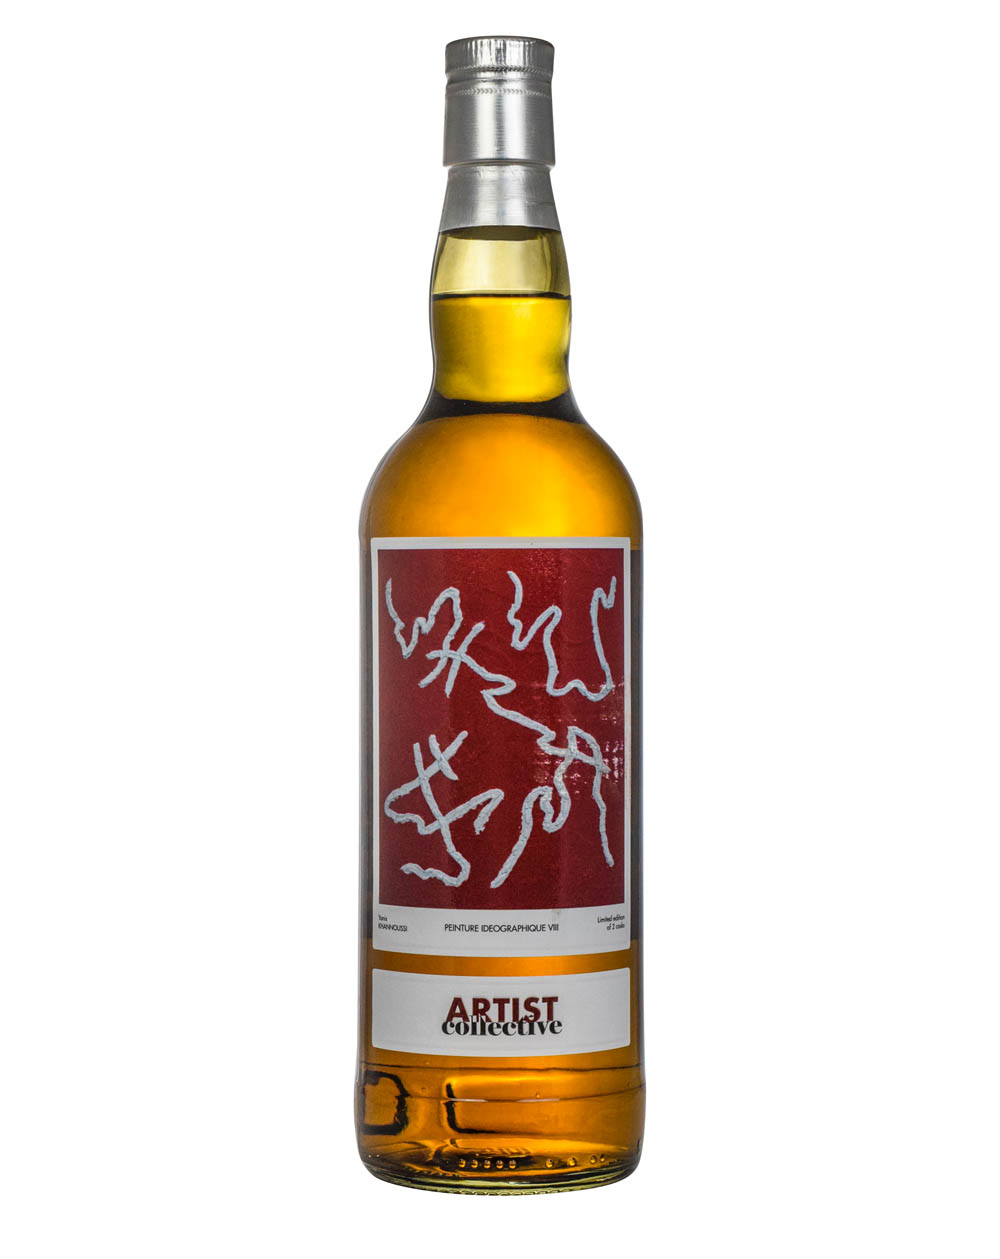 Caol Ila 11 Years Old Artist Collective LMDW 2022 Front Must Have Malts MHM